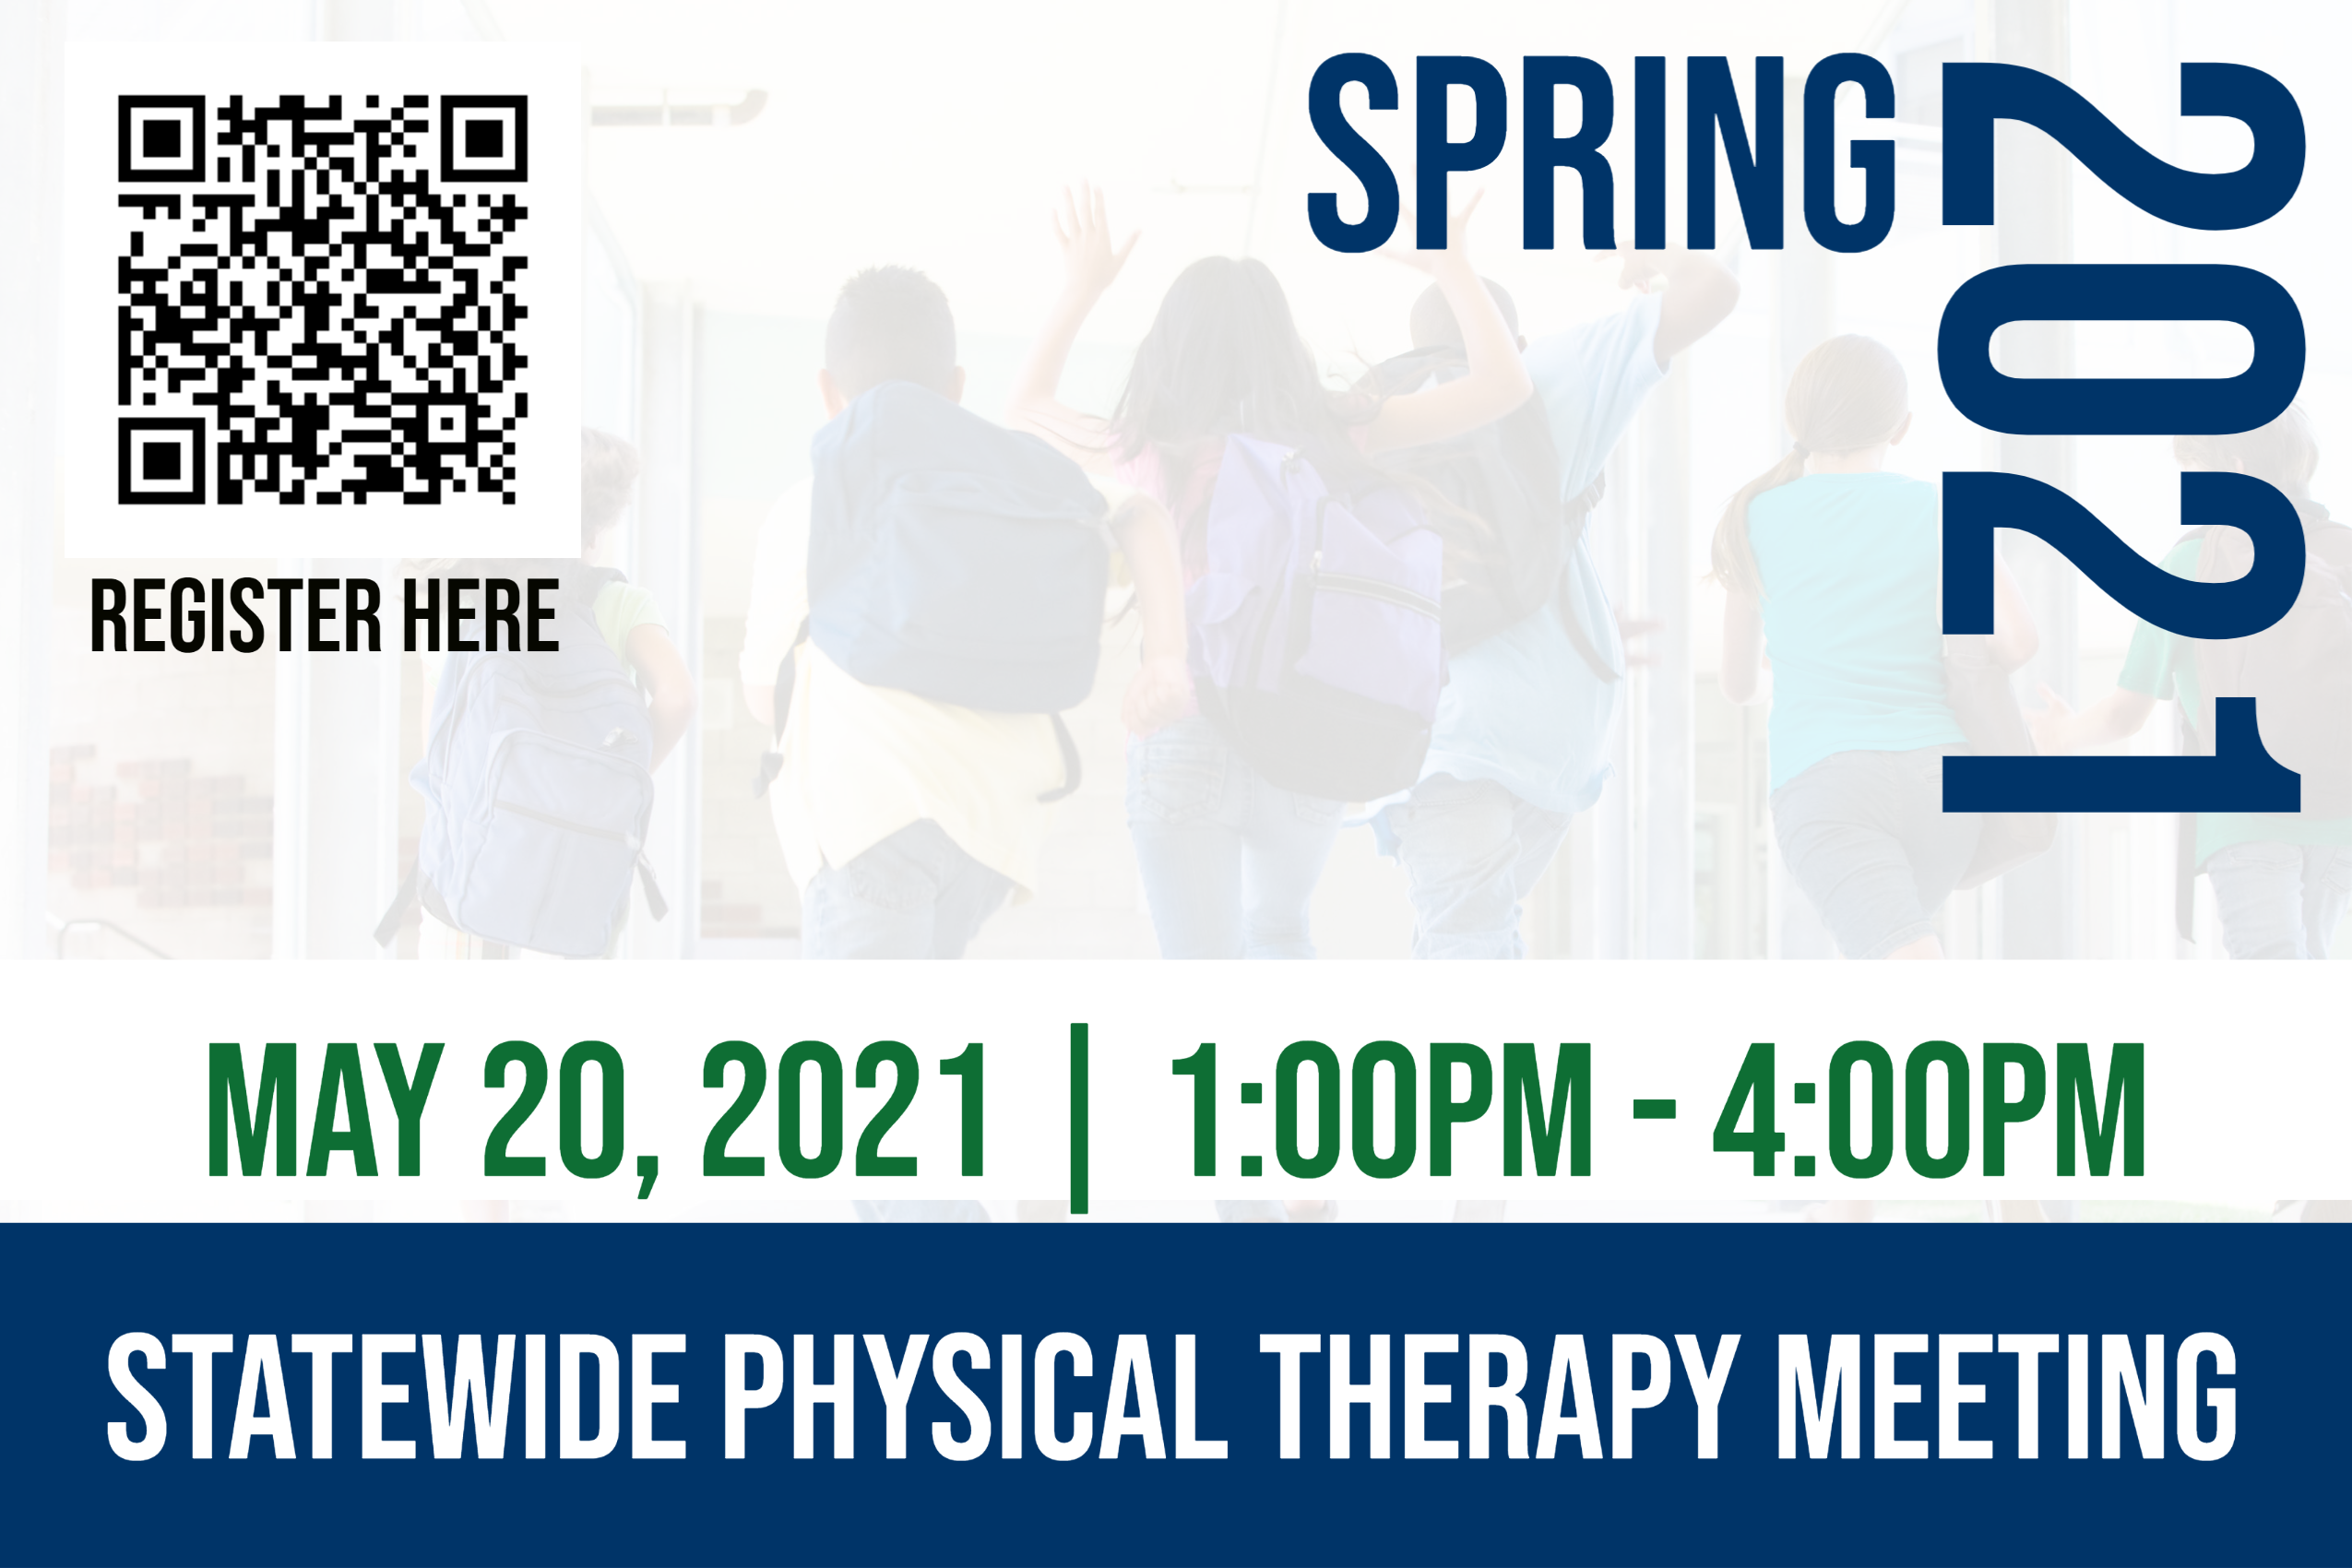 Spring 2021 Statewide Physical Therapy Meeting